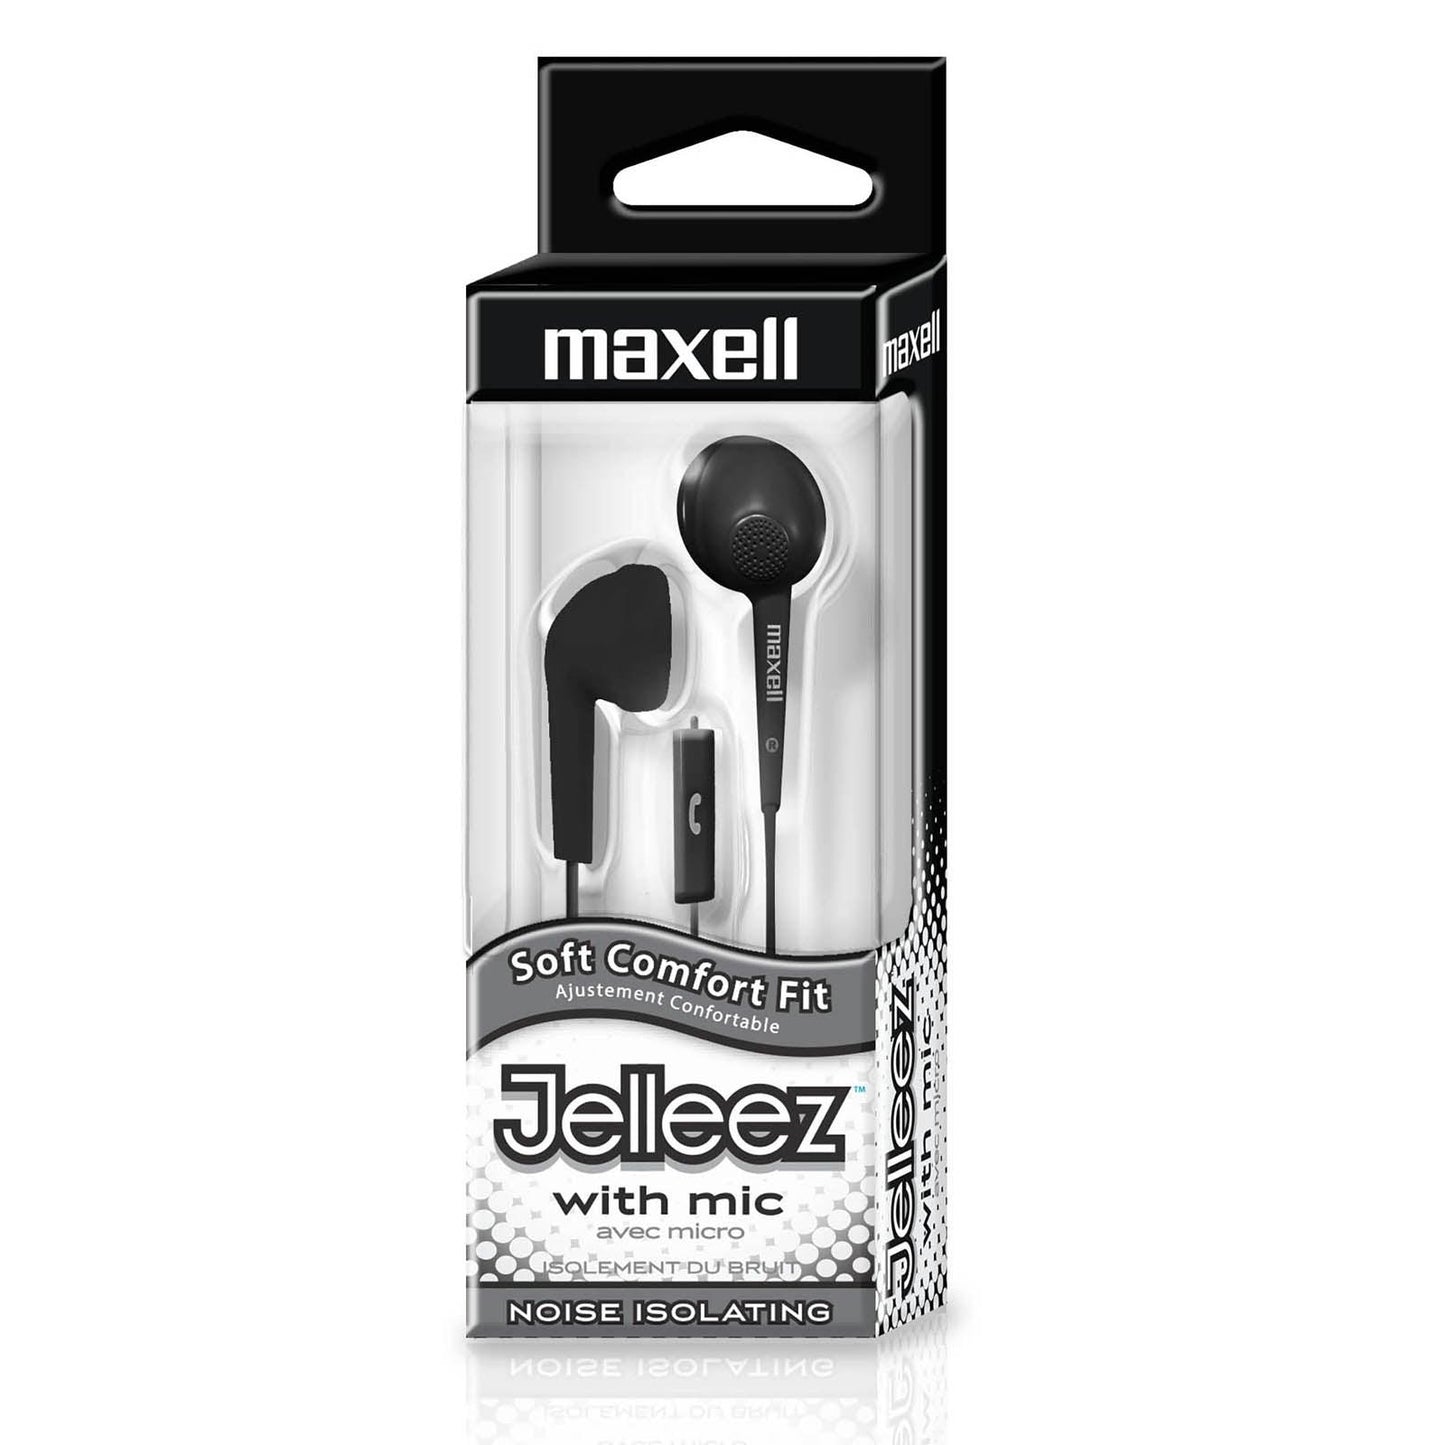 Jelleez™ Soft Earbuds with Mic, Black, Pack of 2 - Loomini